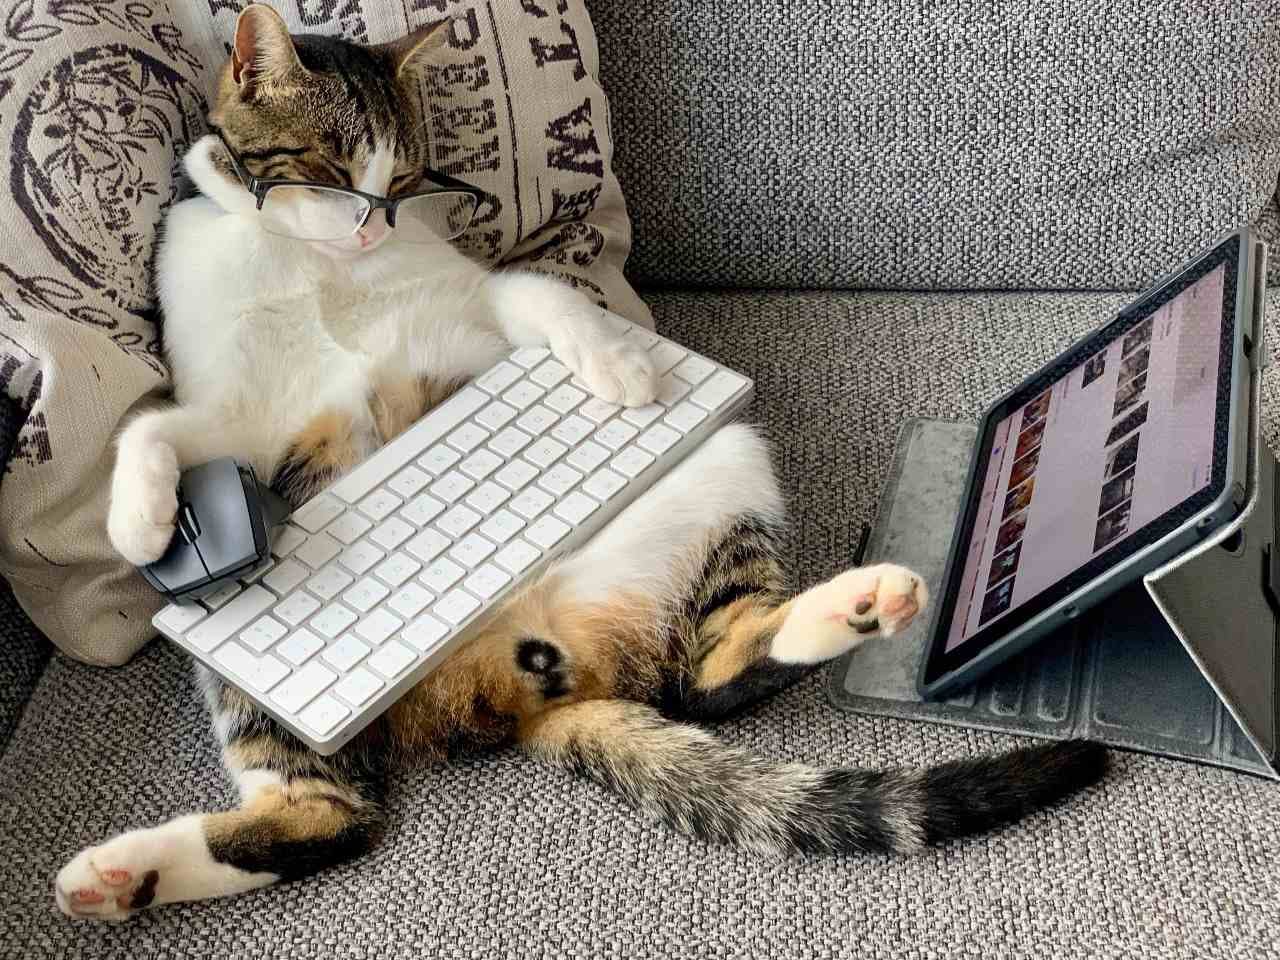 A cat slaying in front of a screen - but do cats watch TV or is the image staged? 